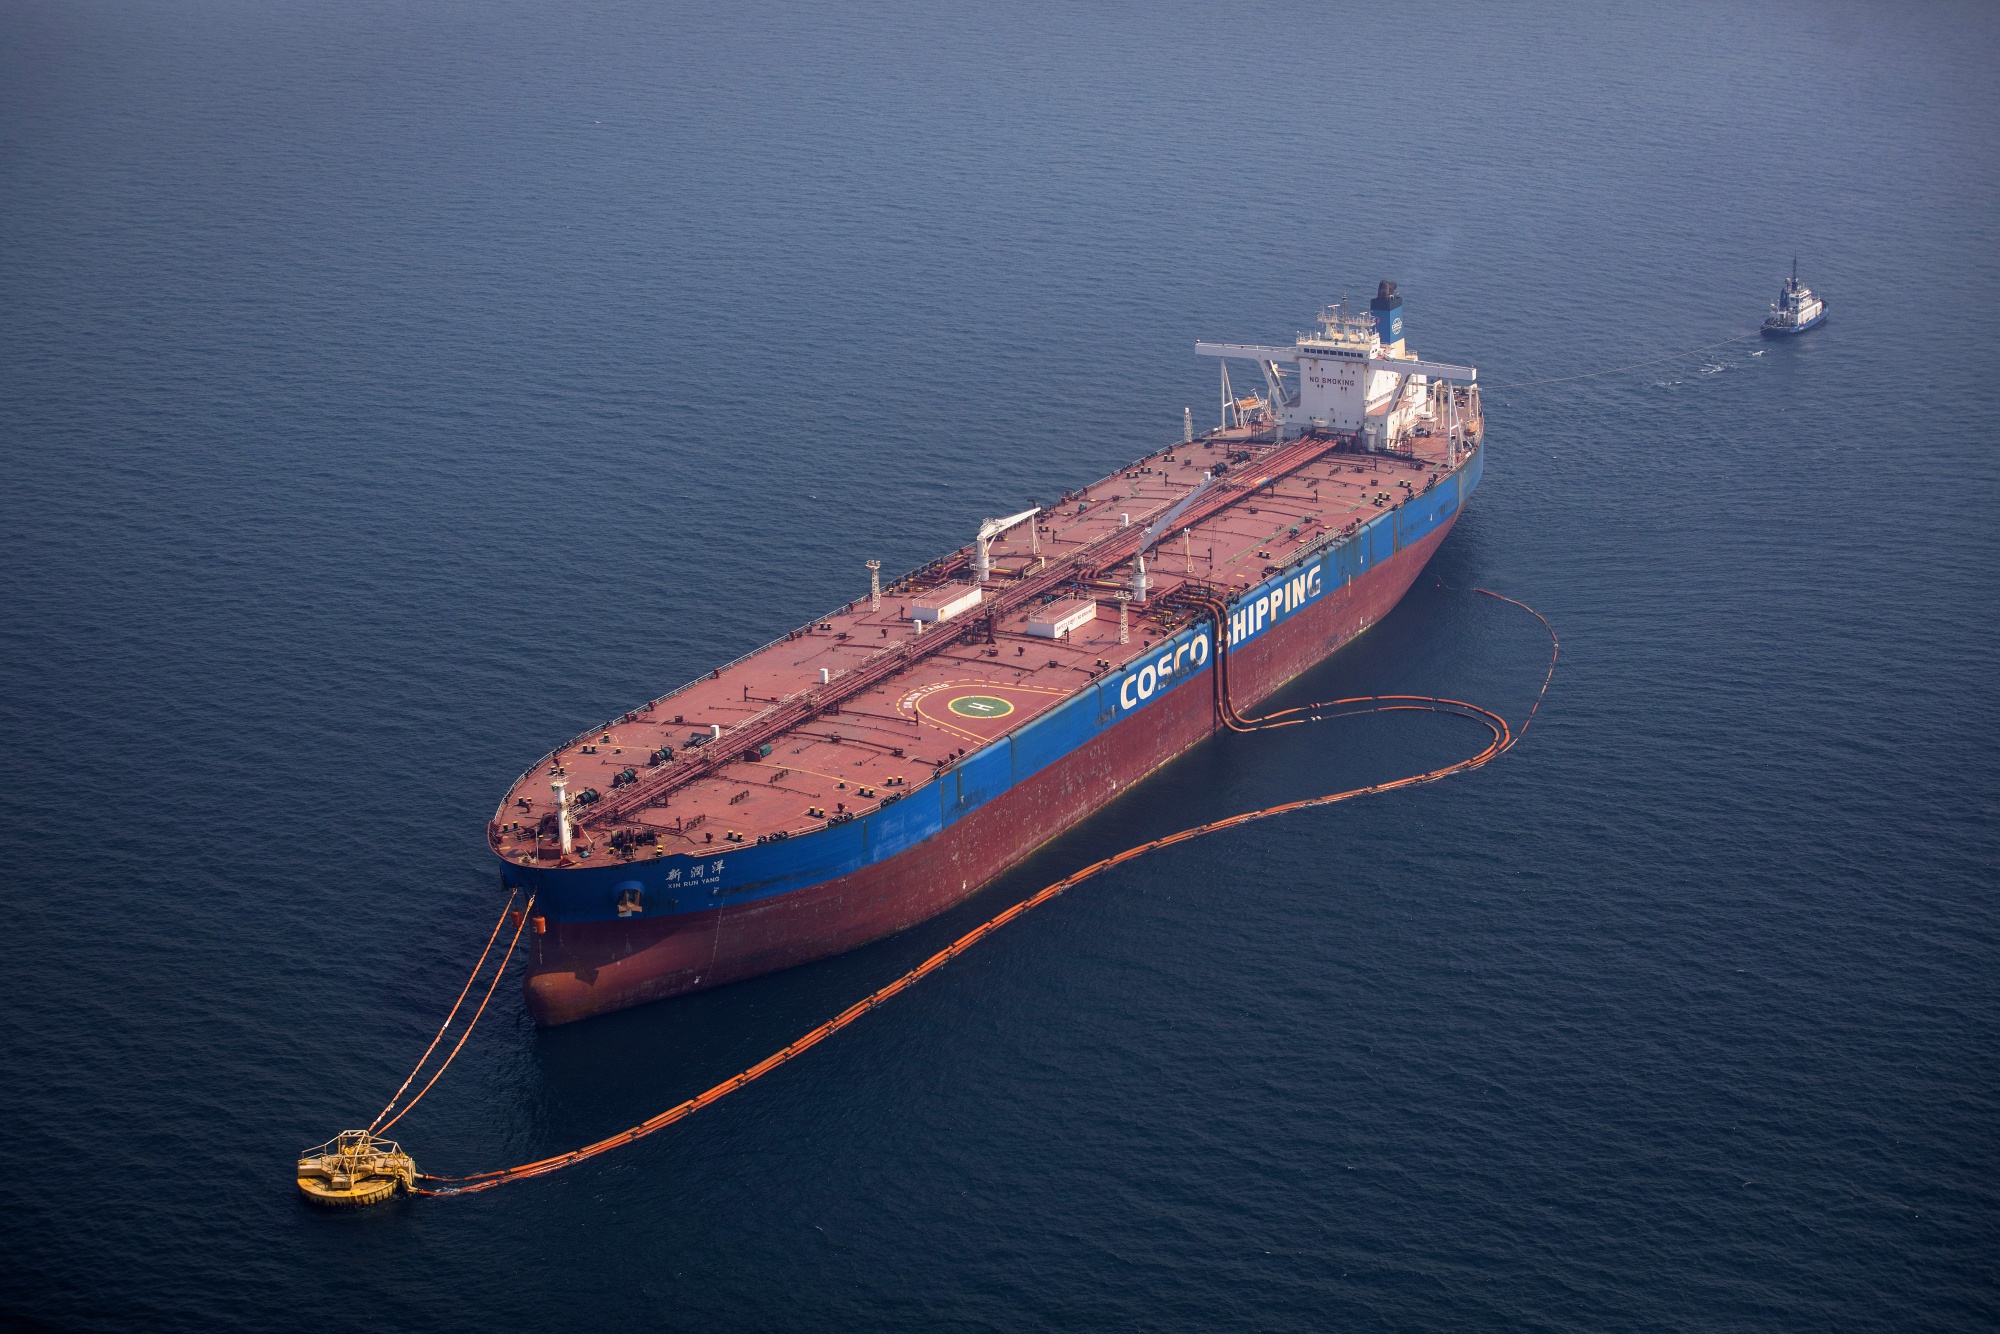 The 'Xin Run Yang' oil tanker, operated by Cosco Shipping Holdings Co., rides its mooring while being loaded with crude oil near Saudi Aramco's Ras Tanura oil refinery, in Ras Tanura, Saudi Arabia, on Wednesday, Oct. 3, 2018. Saudi Aramco aims to become a global refiner and chemical maker, seeking to profit from parts of the oil industry where demand is growing the fastest while also underpinning the kingdoms economic diversification. Photographer: Simon Dawson/Bloomberg